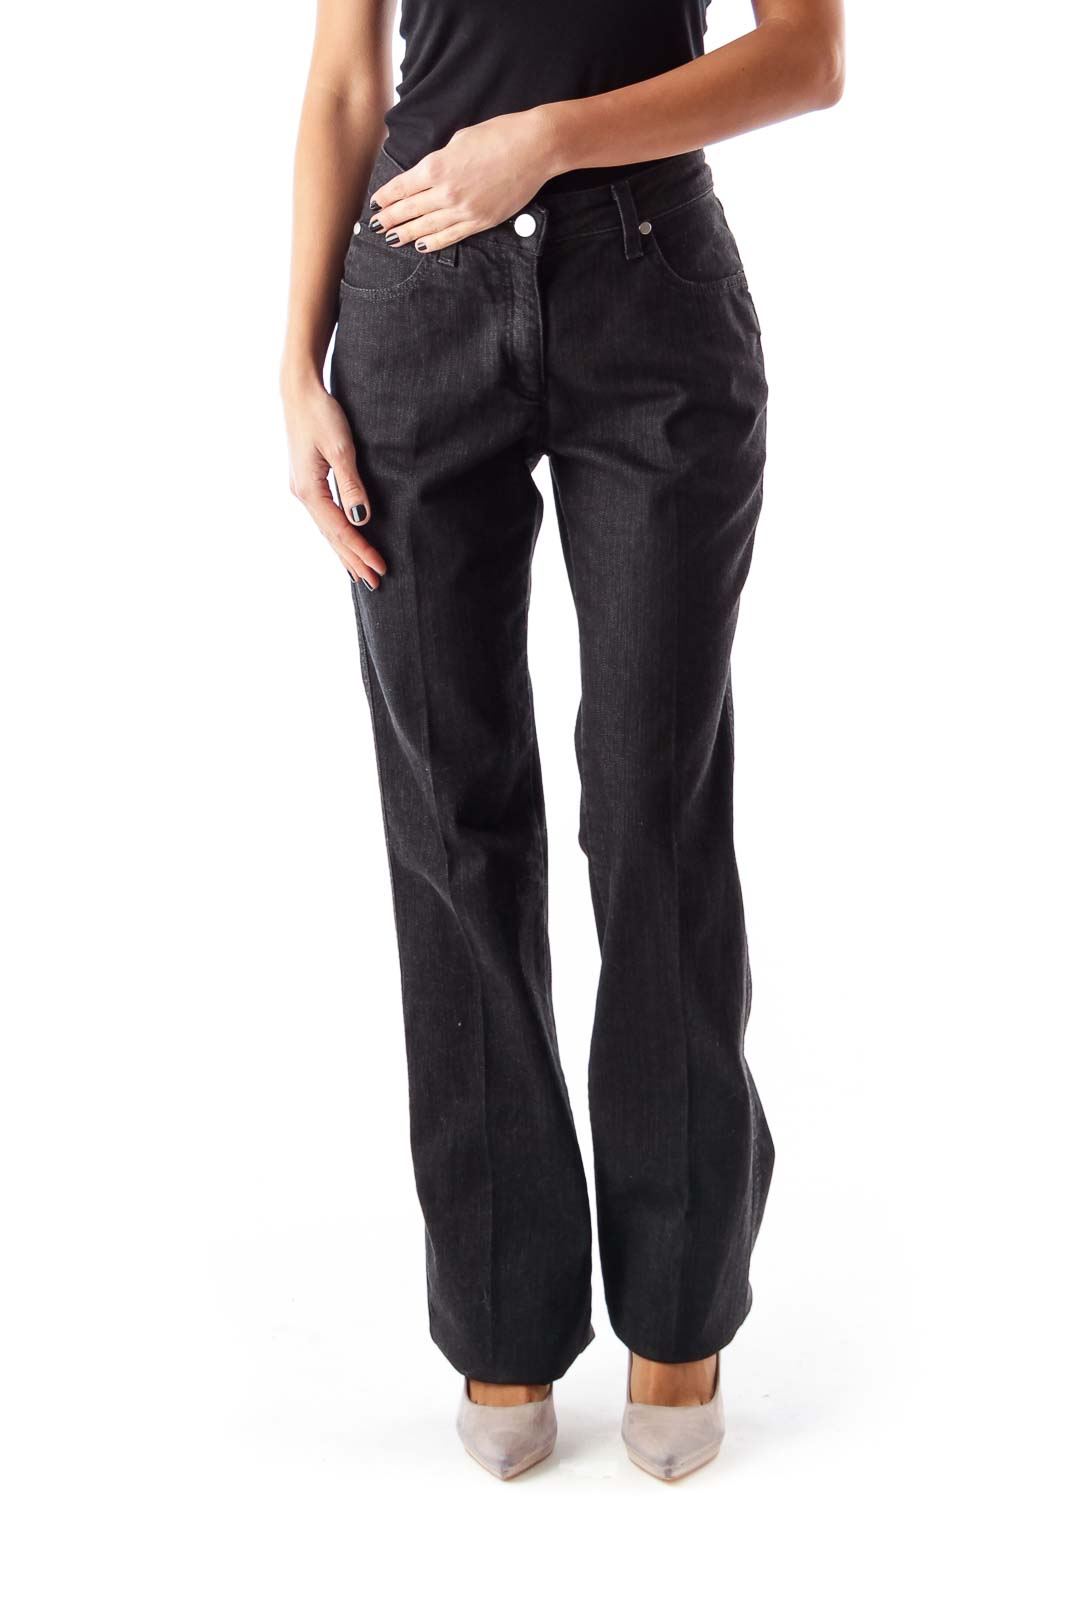 Black Mid-Waist Flare Jeans Front